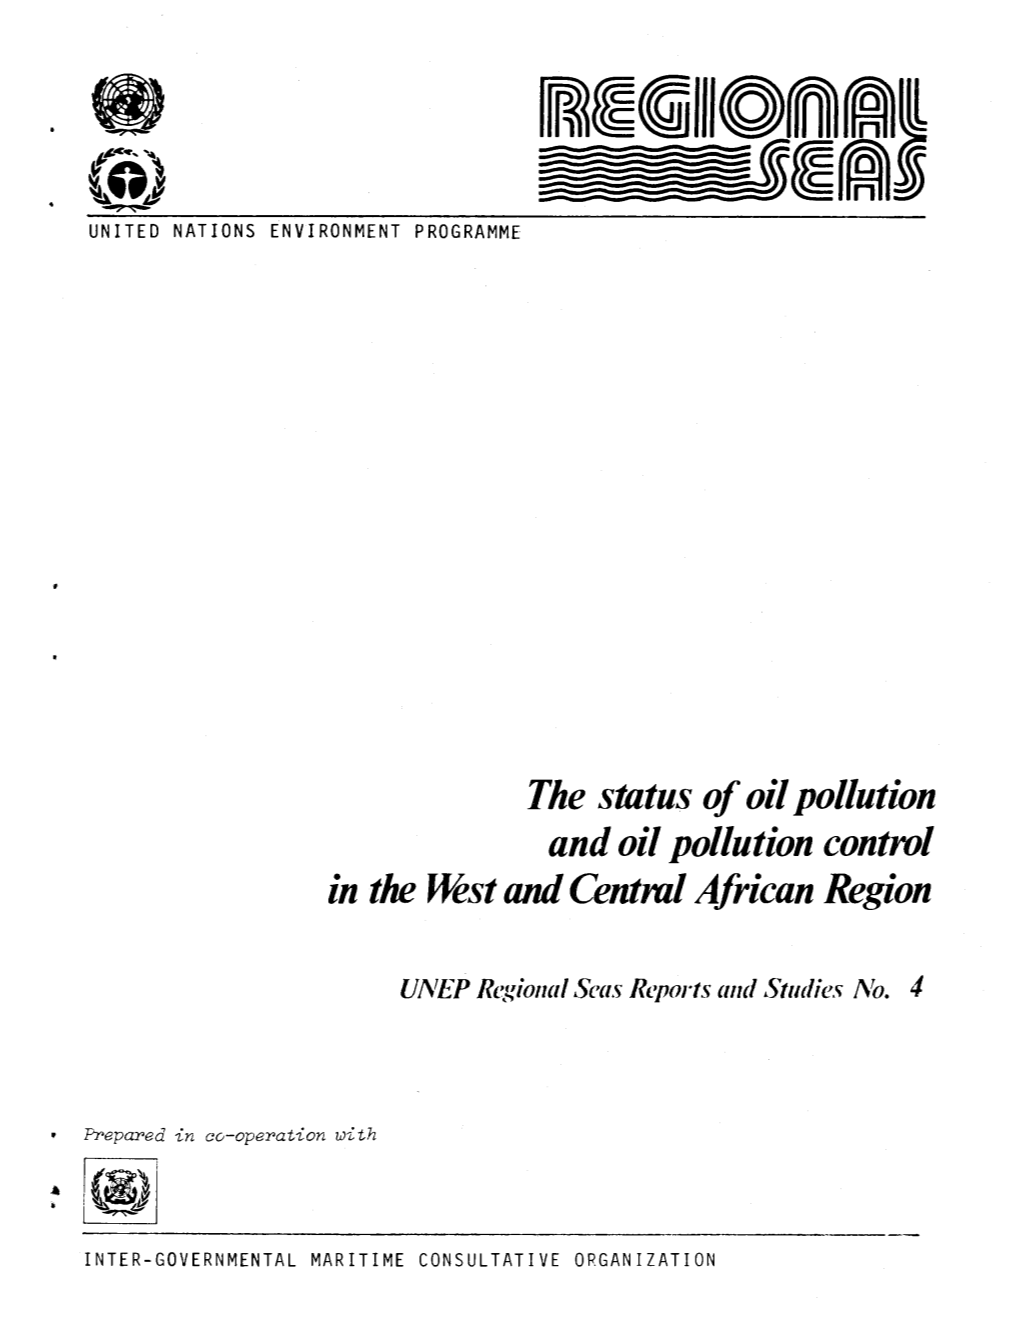 The Status of Oil Pollution and Oil Pollution Control in the West and Central Aftrican Region